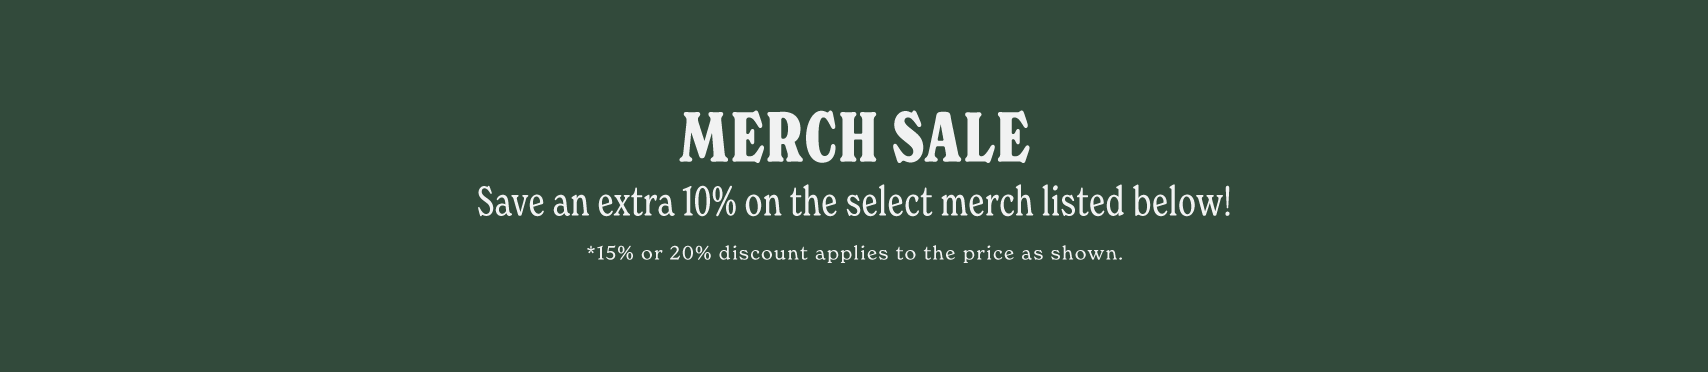 MERCH SALE. SAVE AN EXTRA 10% ON SELECT MERCH LISTED BELOW! *15% OR 20% DISCOUNT APPLIES TO THE PRICE AS SHOWN.